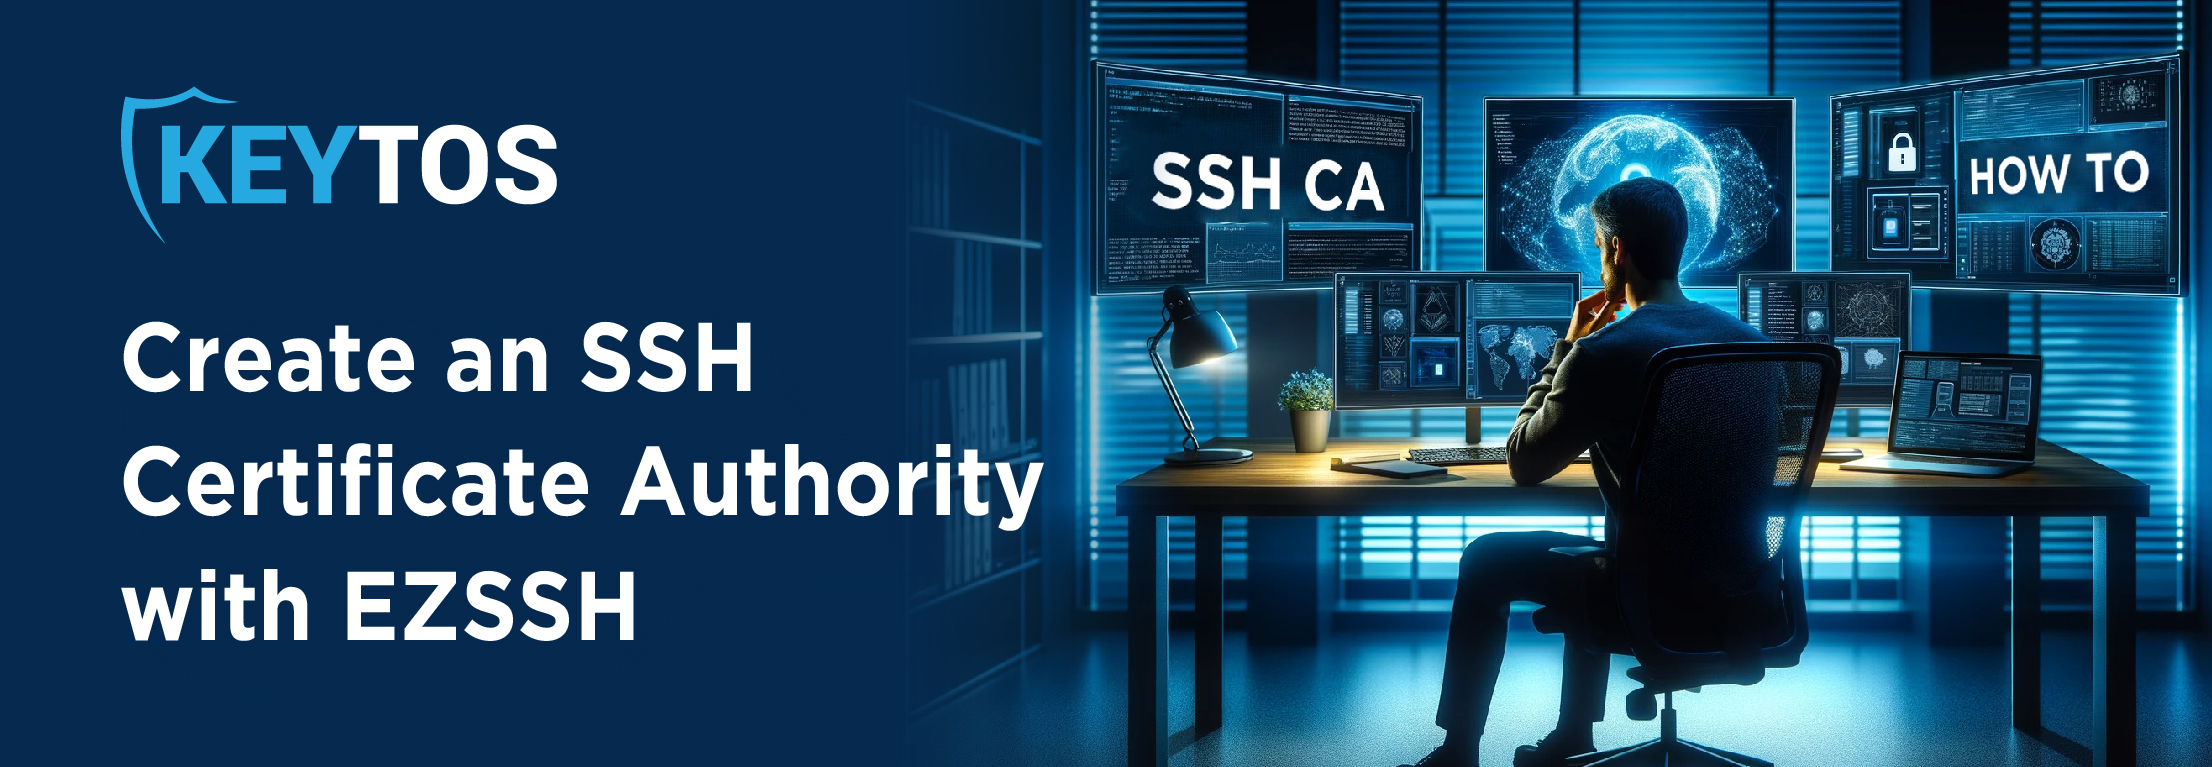 How to Create an SSH Certificate Authority in Azure for Entra ID